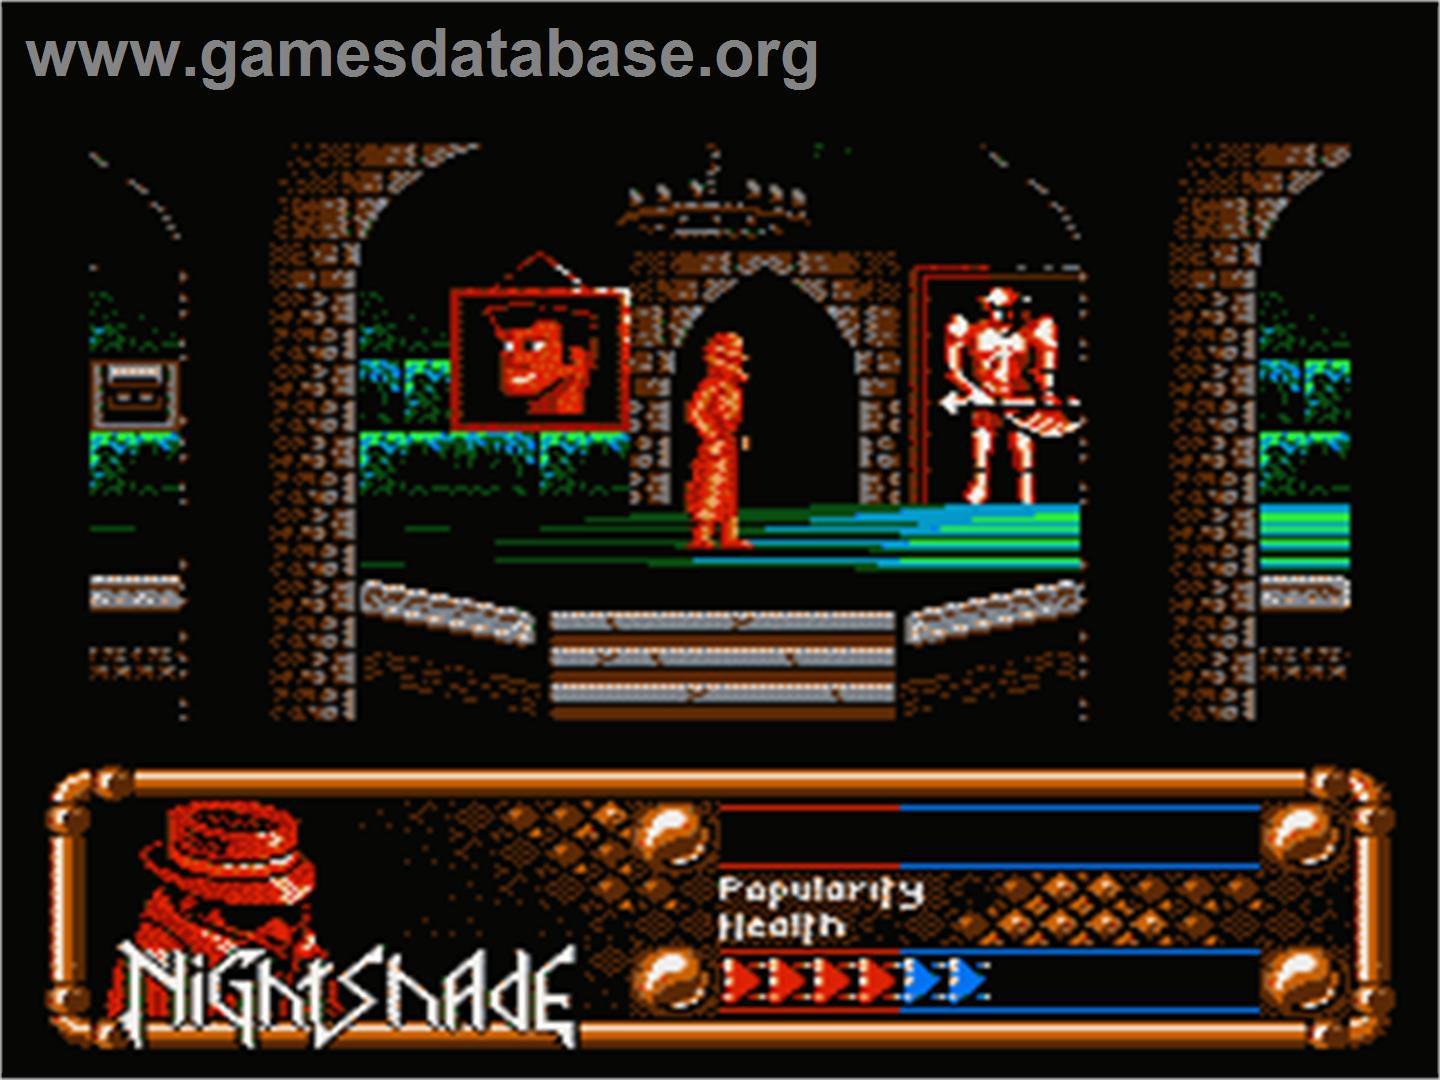 Nightshade: Part 1 - The Claws of Sutekh - Nintendo NES - Artwork - In Game